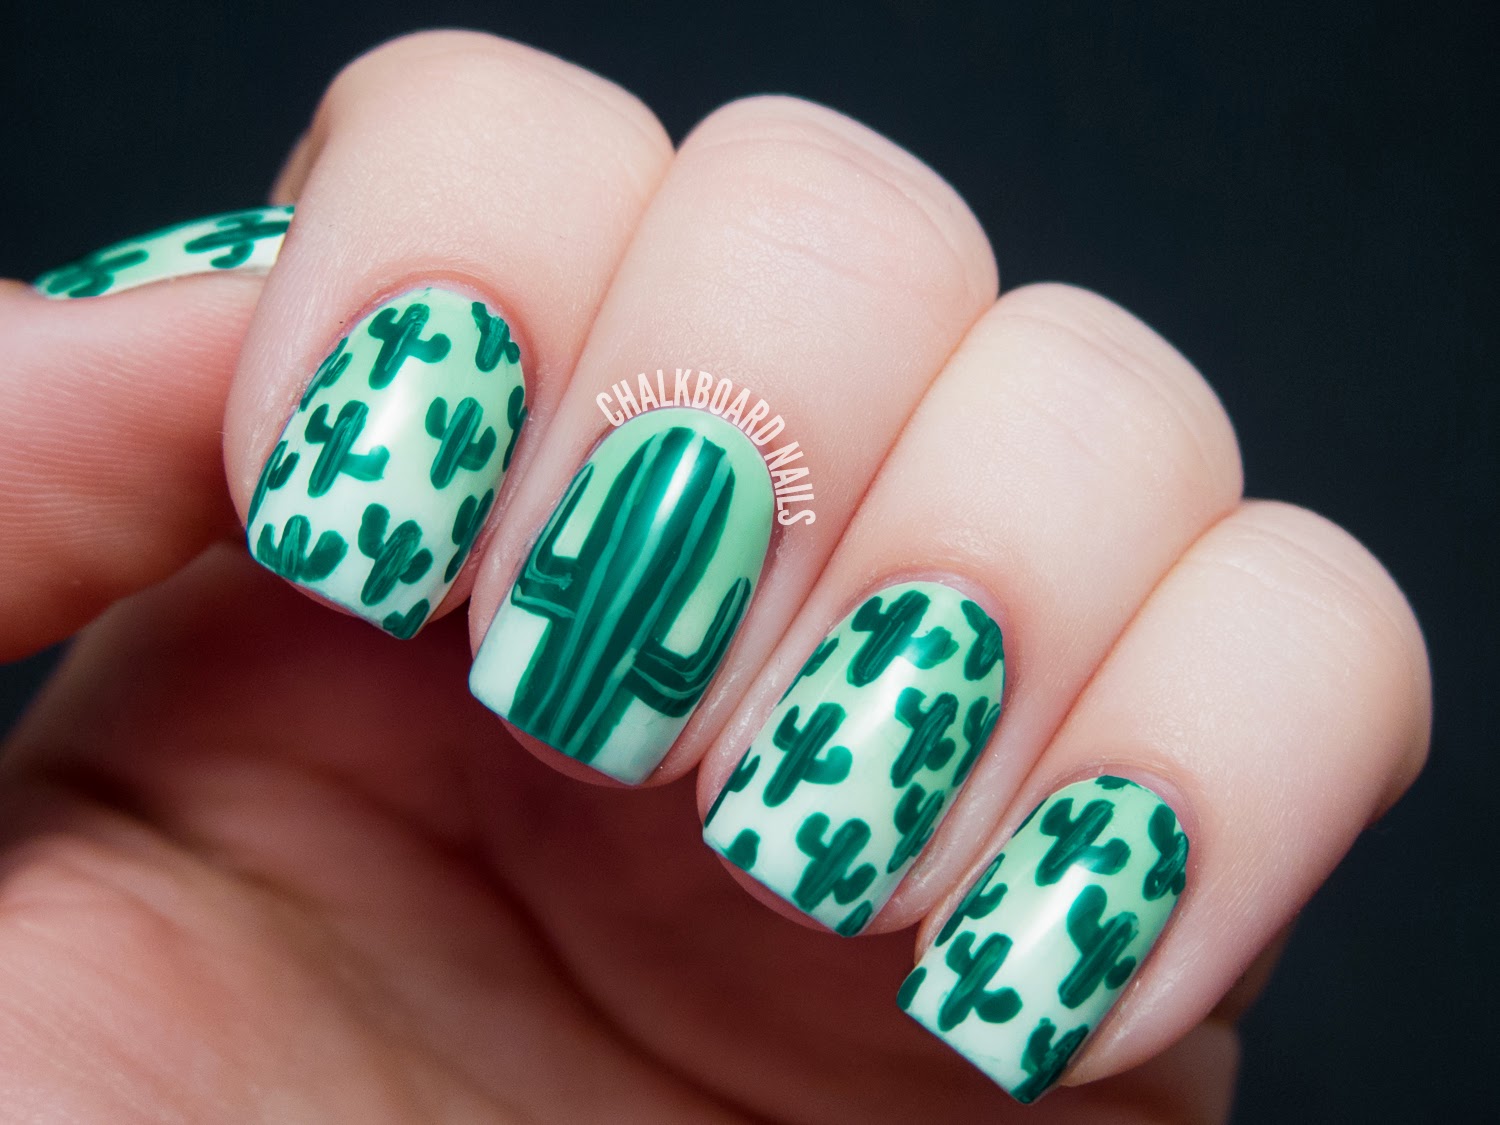 Cactus and sombrero nail designs for your Mexico trip - wide 9